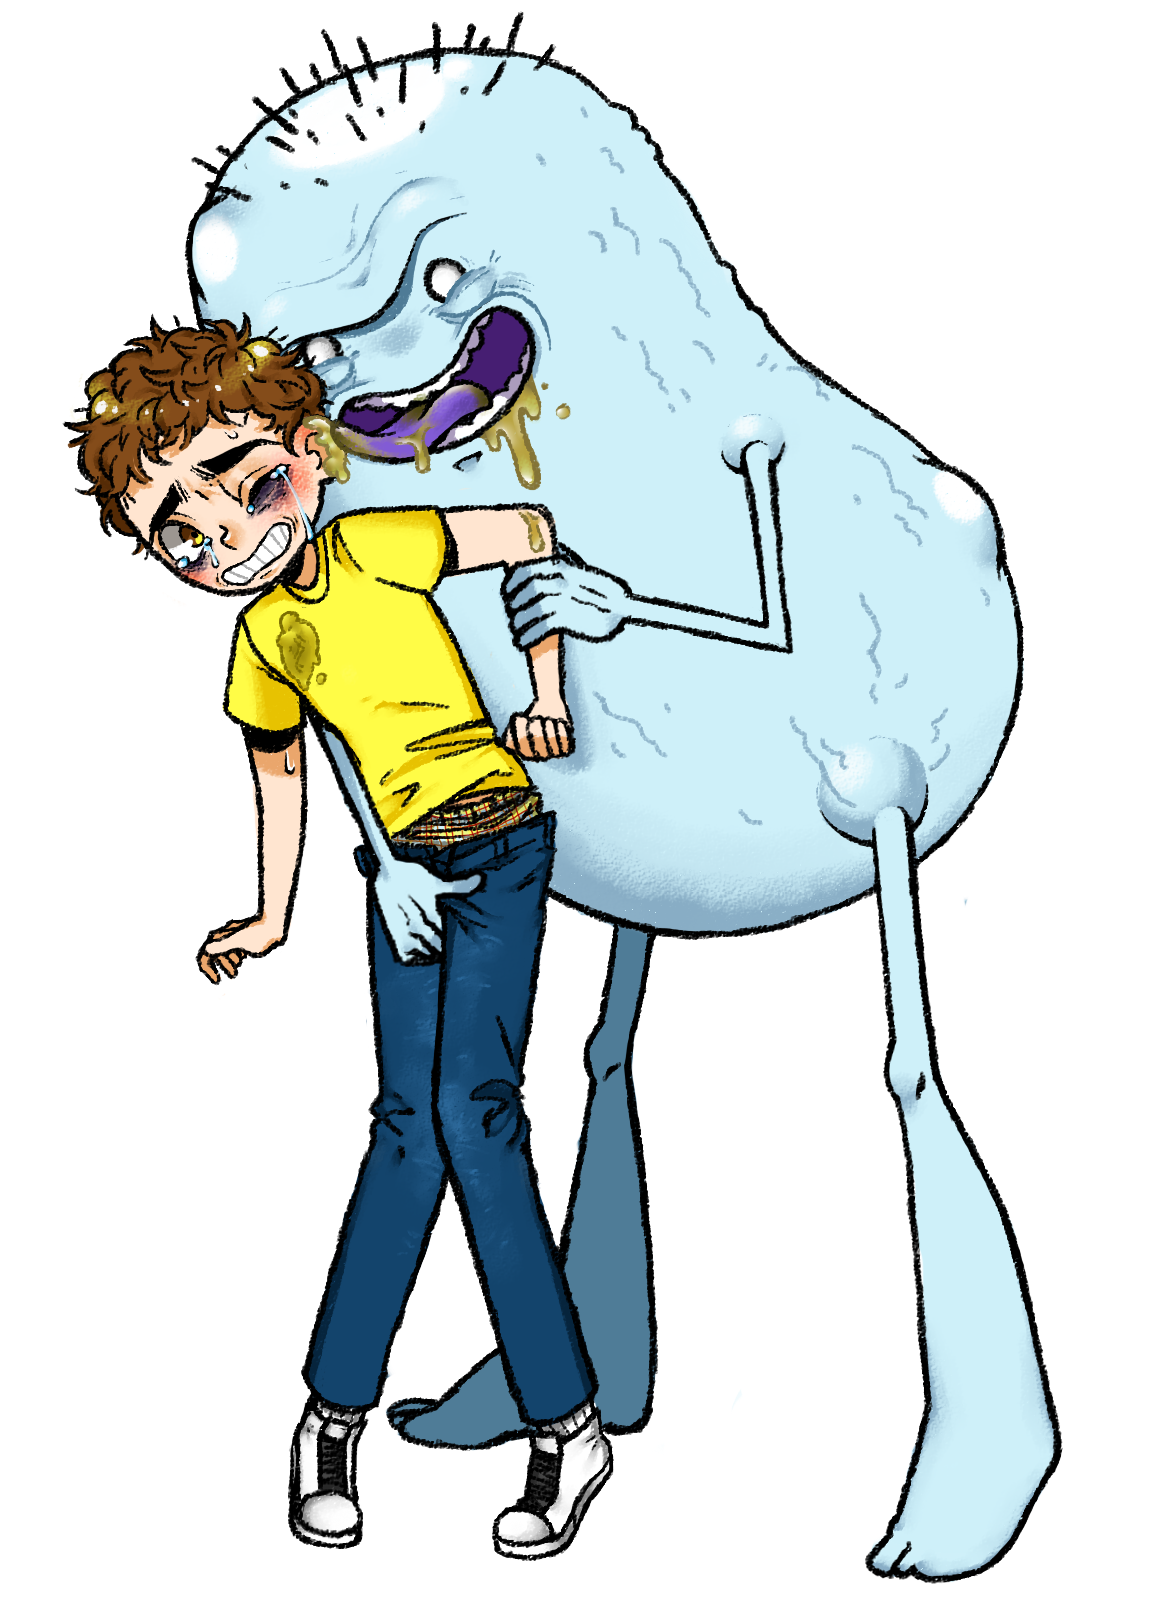 1290437 - Morty_Smith Rick_and_Morty White-Lashes king_jellybean.png.